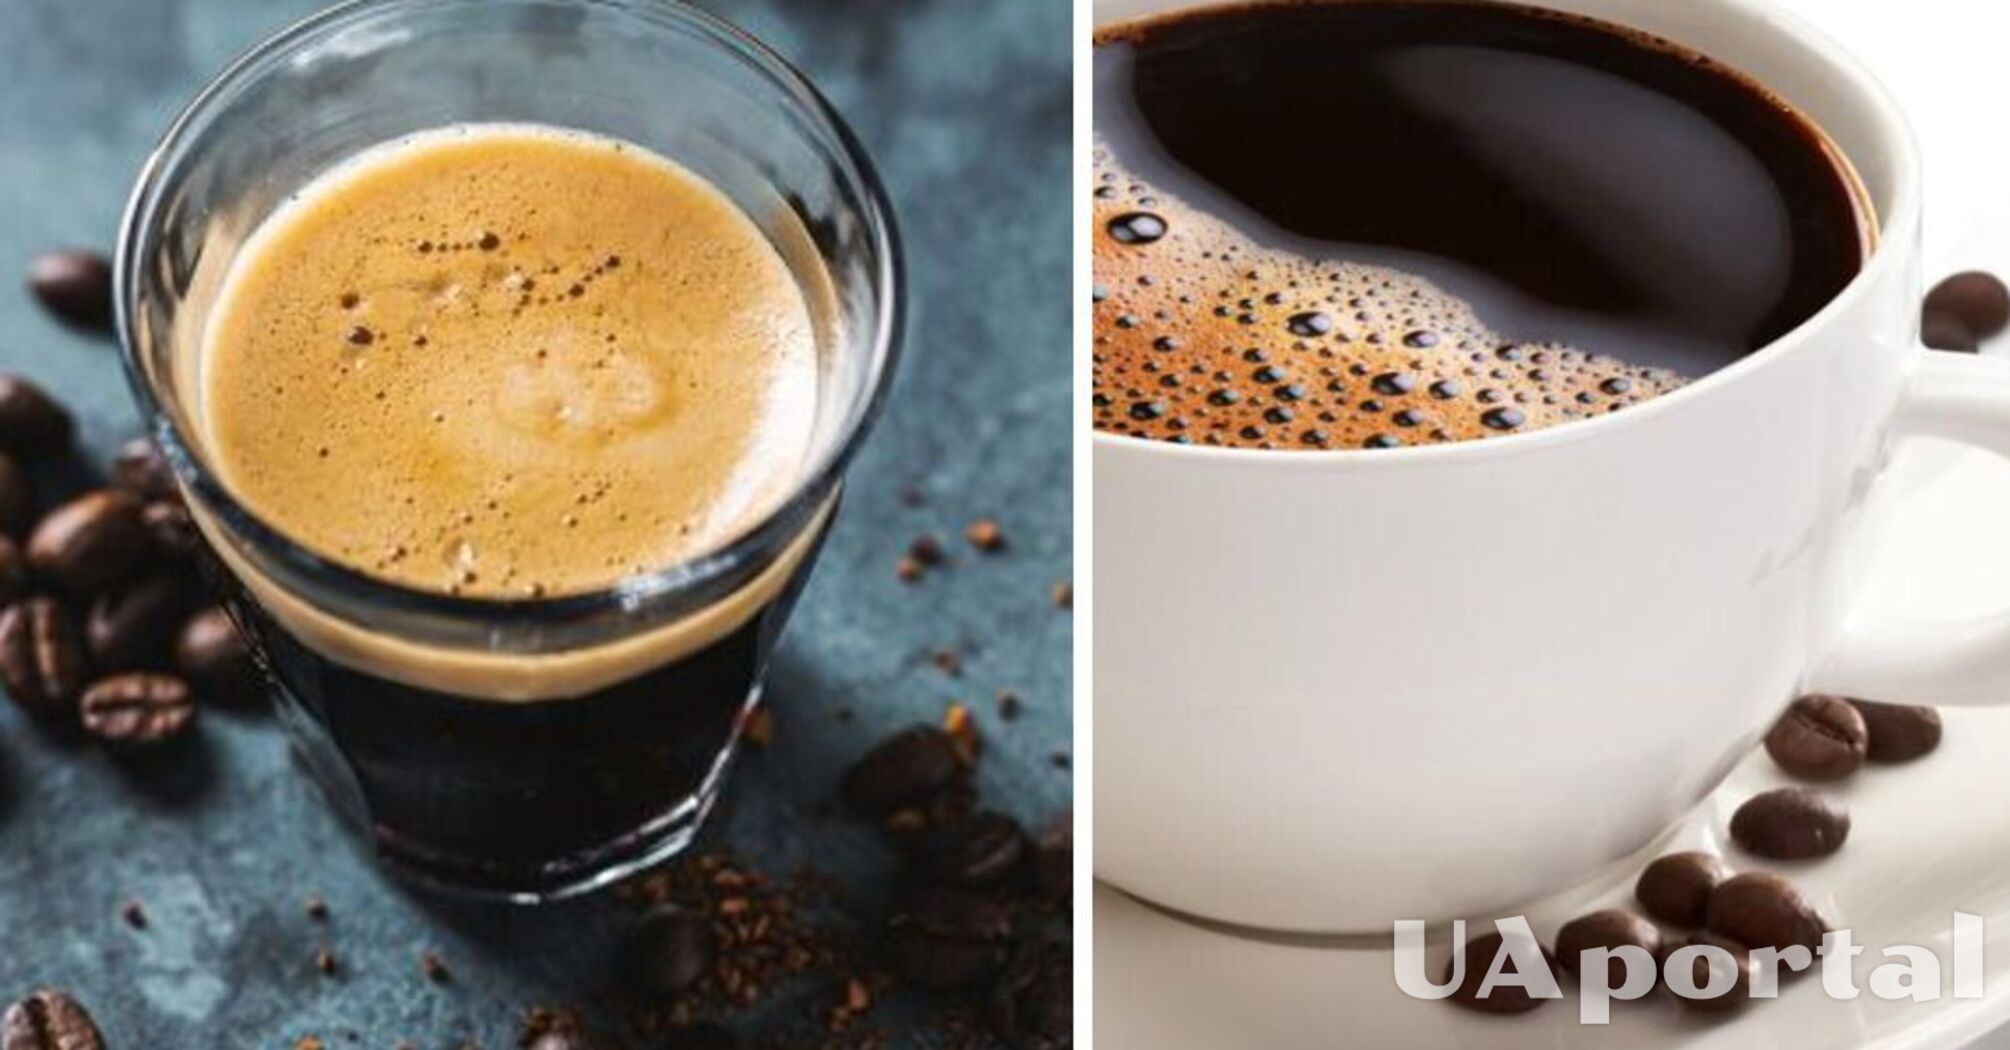 Increases the risk of heart attack and irritates the intestines: who is strictly contraindicated to drink coffee